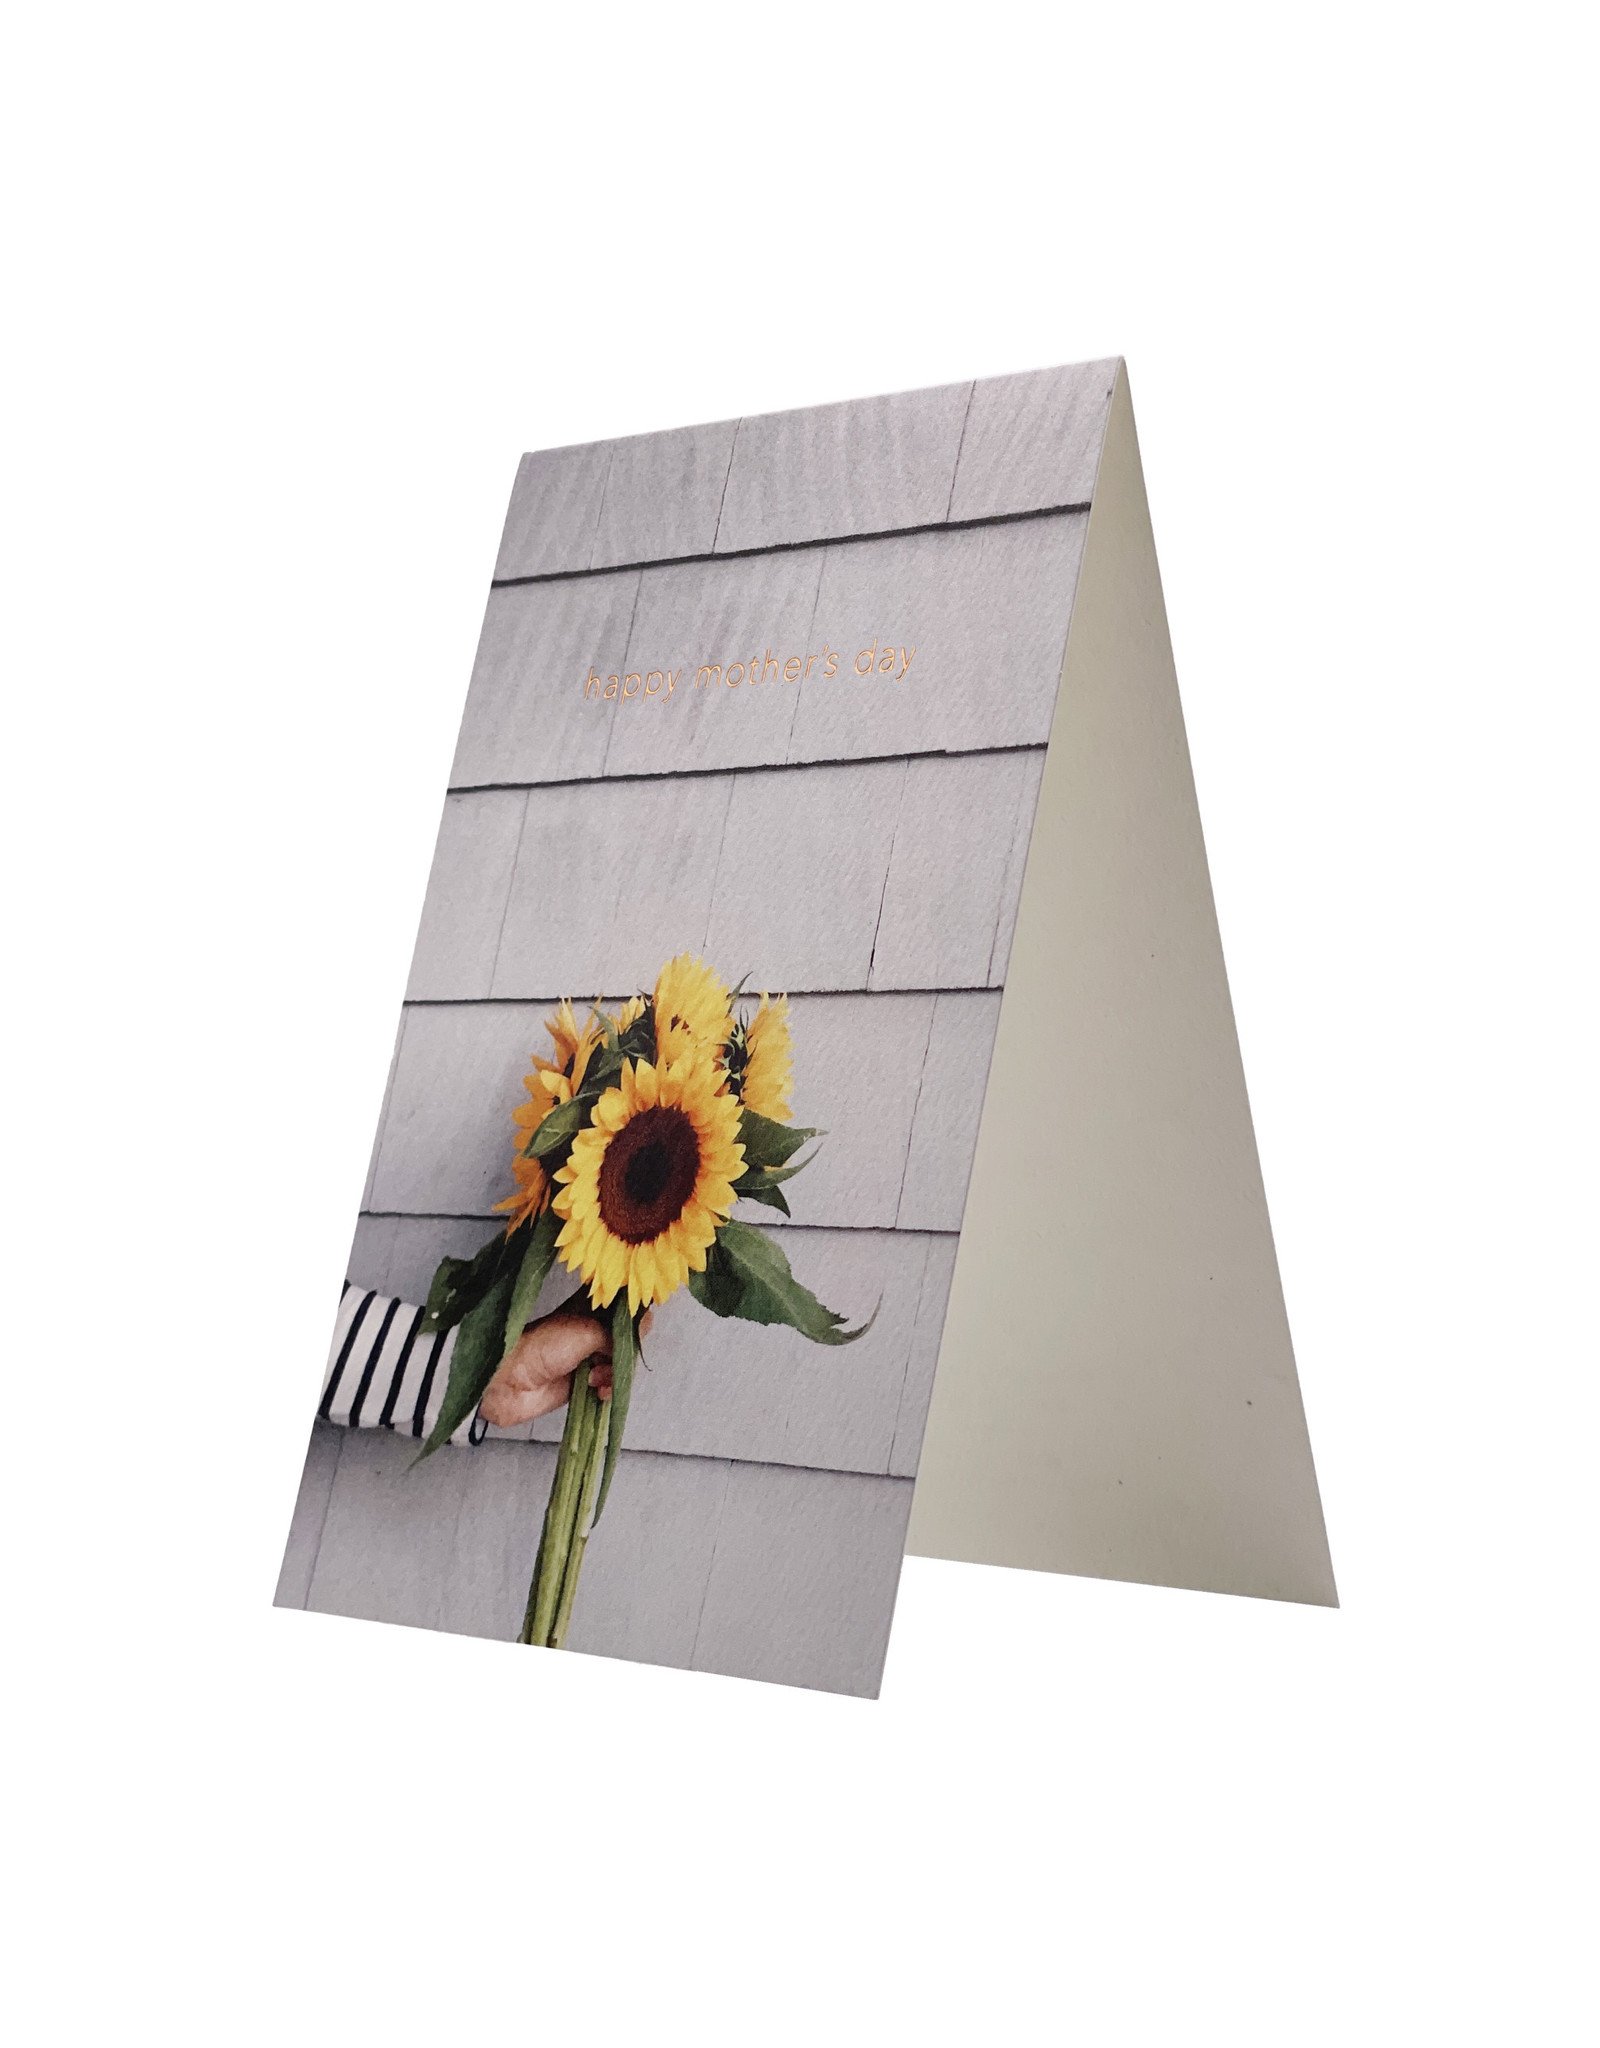 Old Tom Foolery Mother's Day Sunflowers Notecard